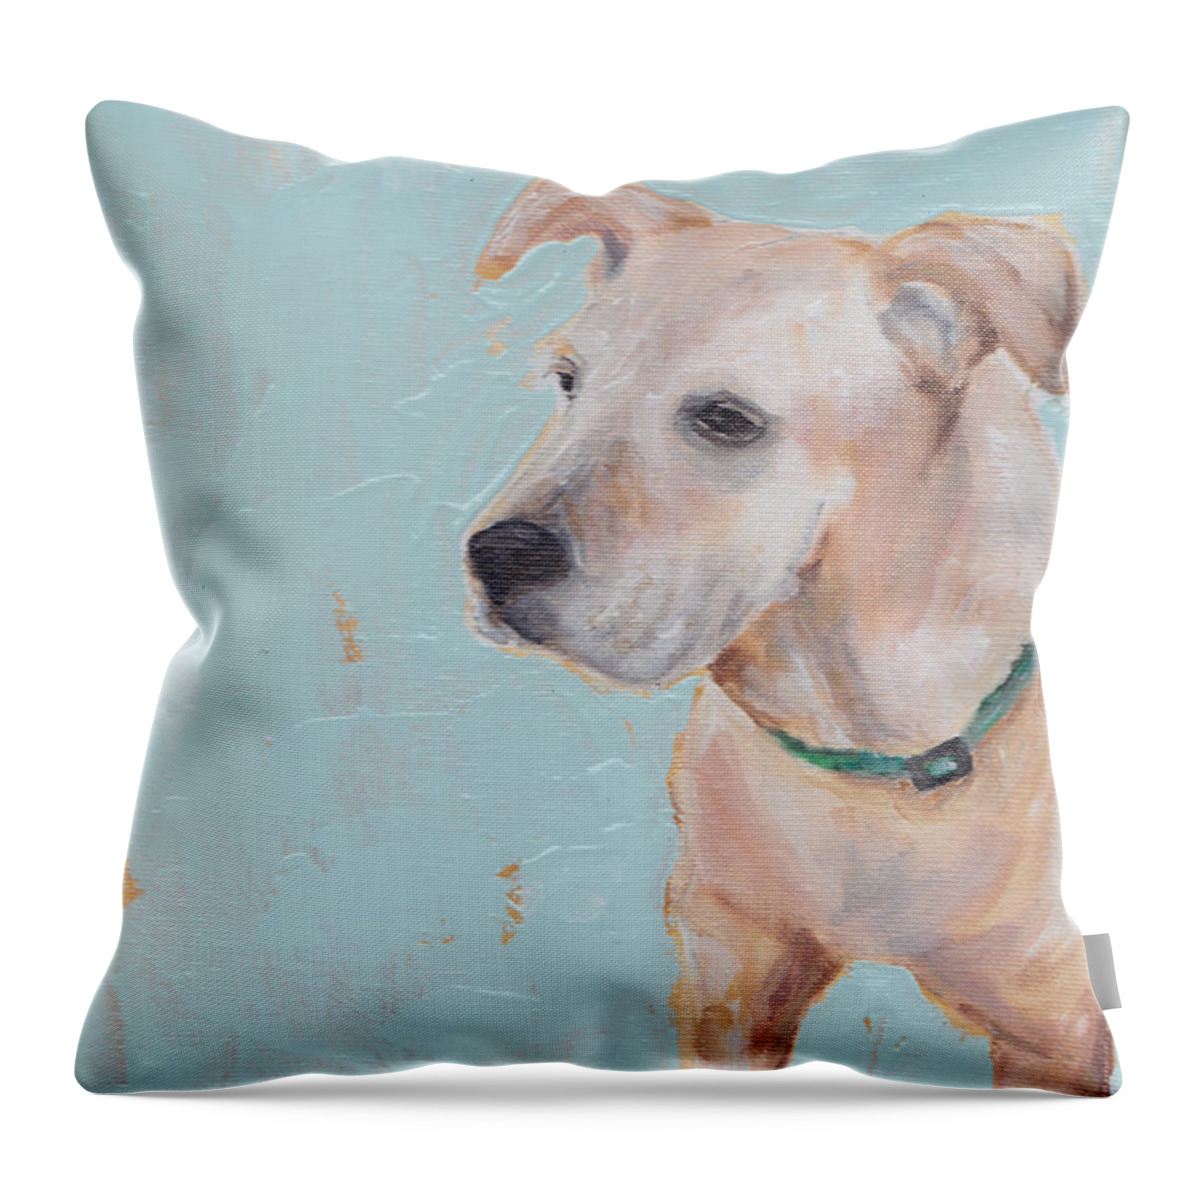 Caramel Throw Pillow featuring the painting Caramel by Robin Wiesneth